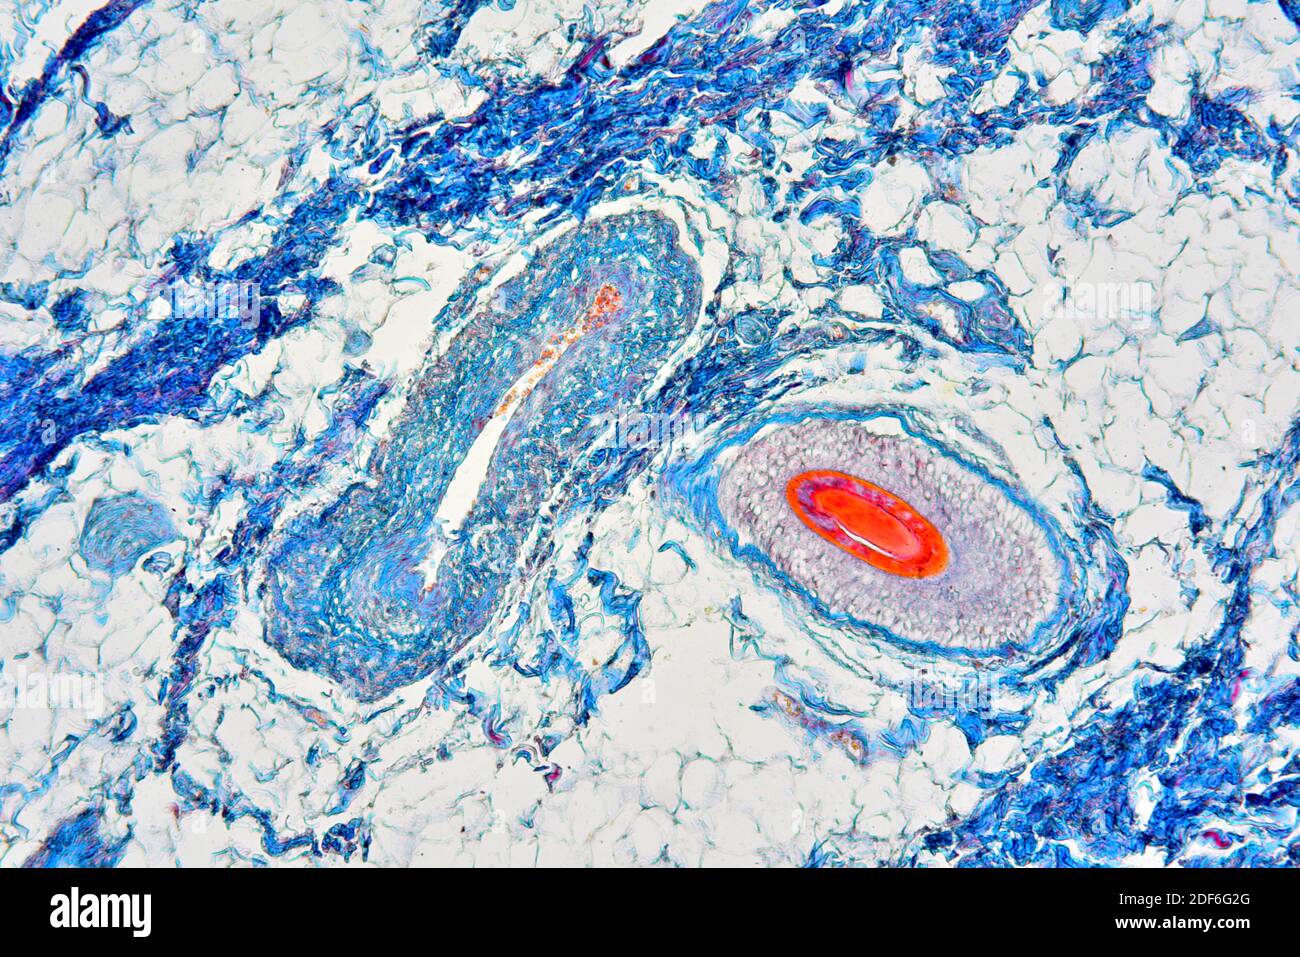 Rectum (large intestine) showing connective tissue, adipose tissue and vessels. Optical microscope X100. Stock Photo